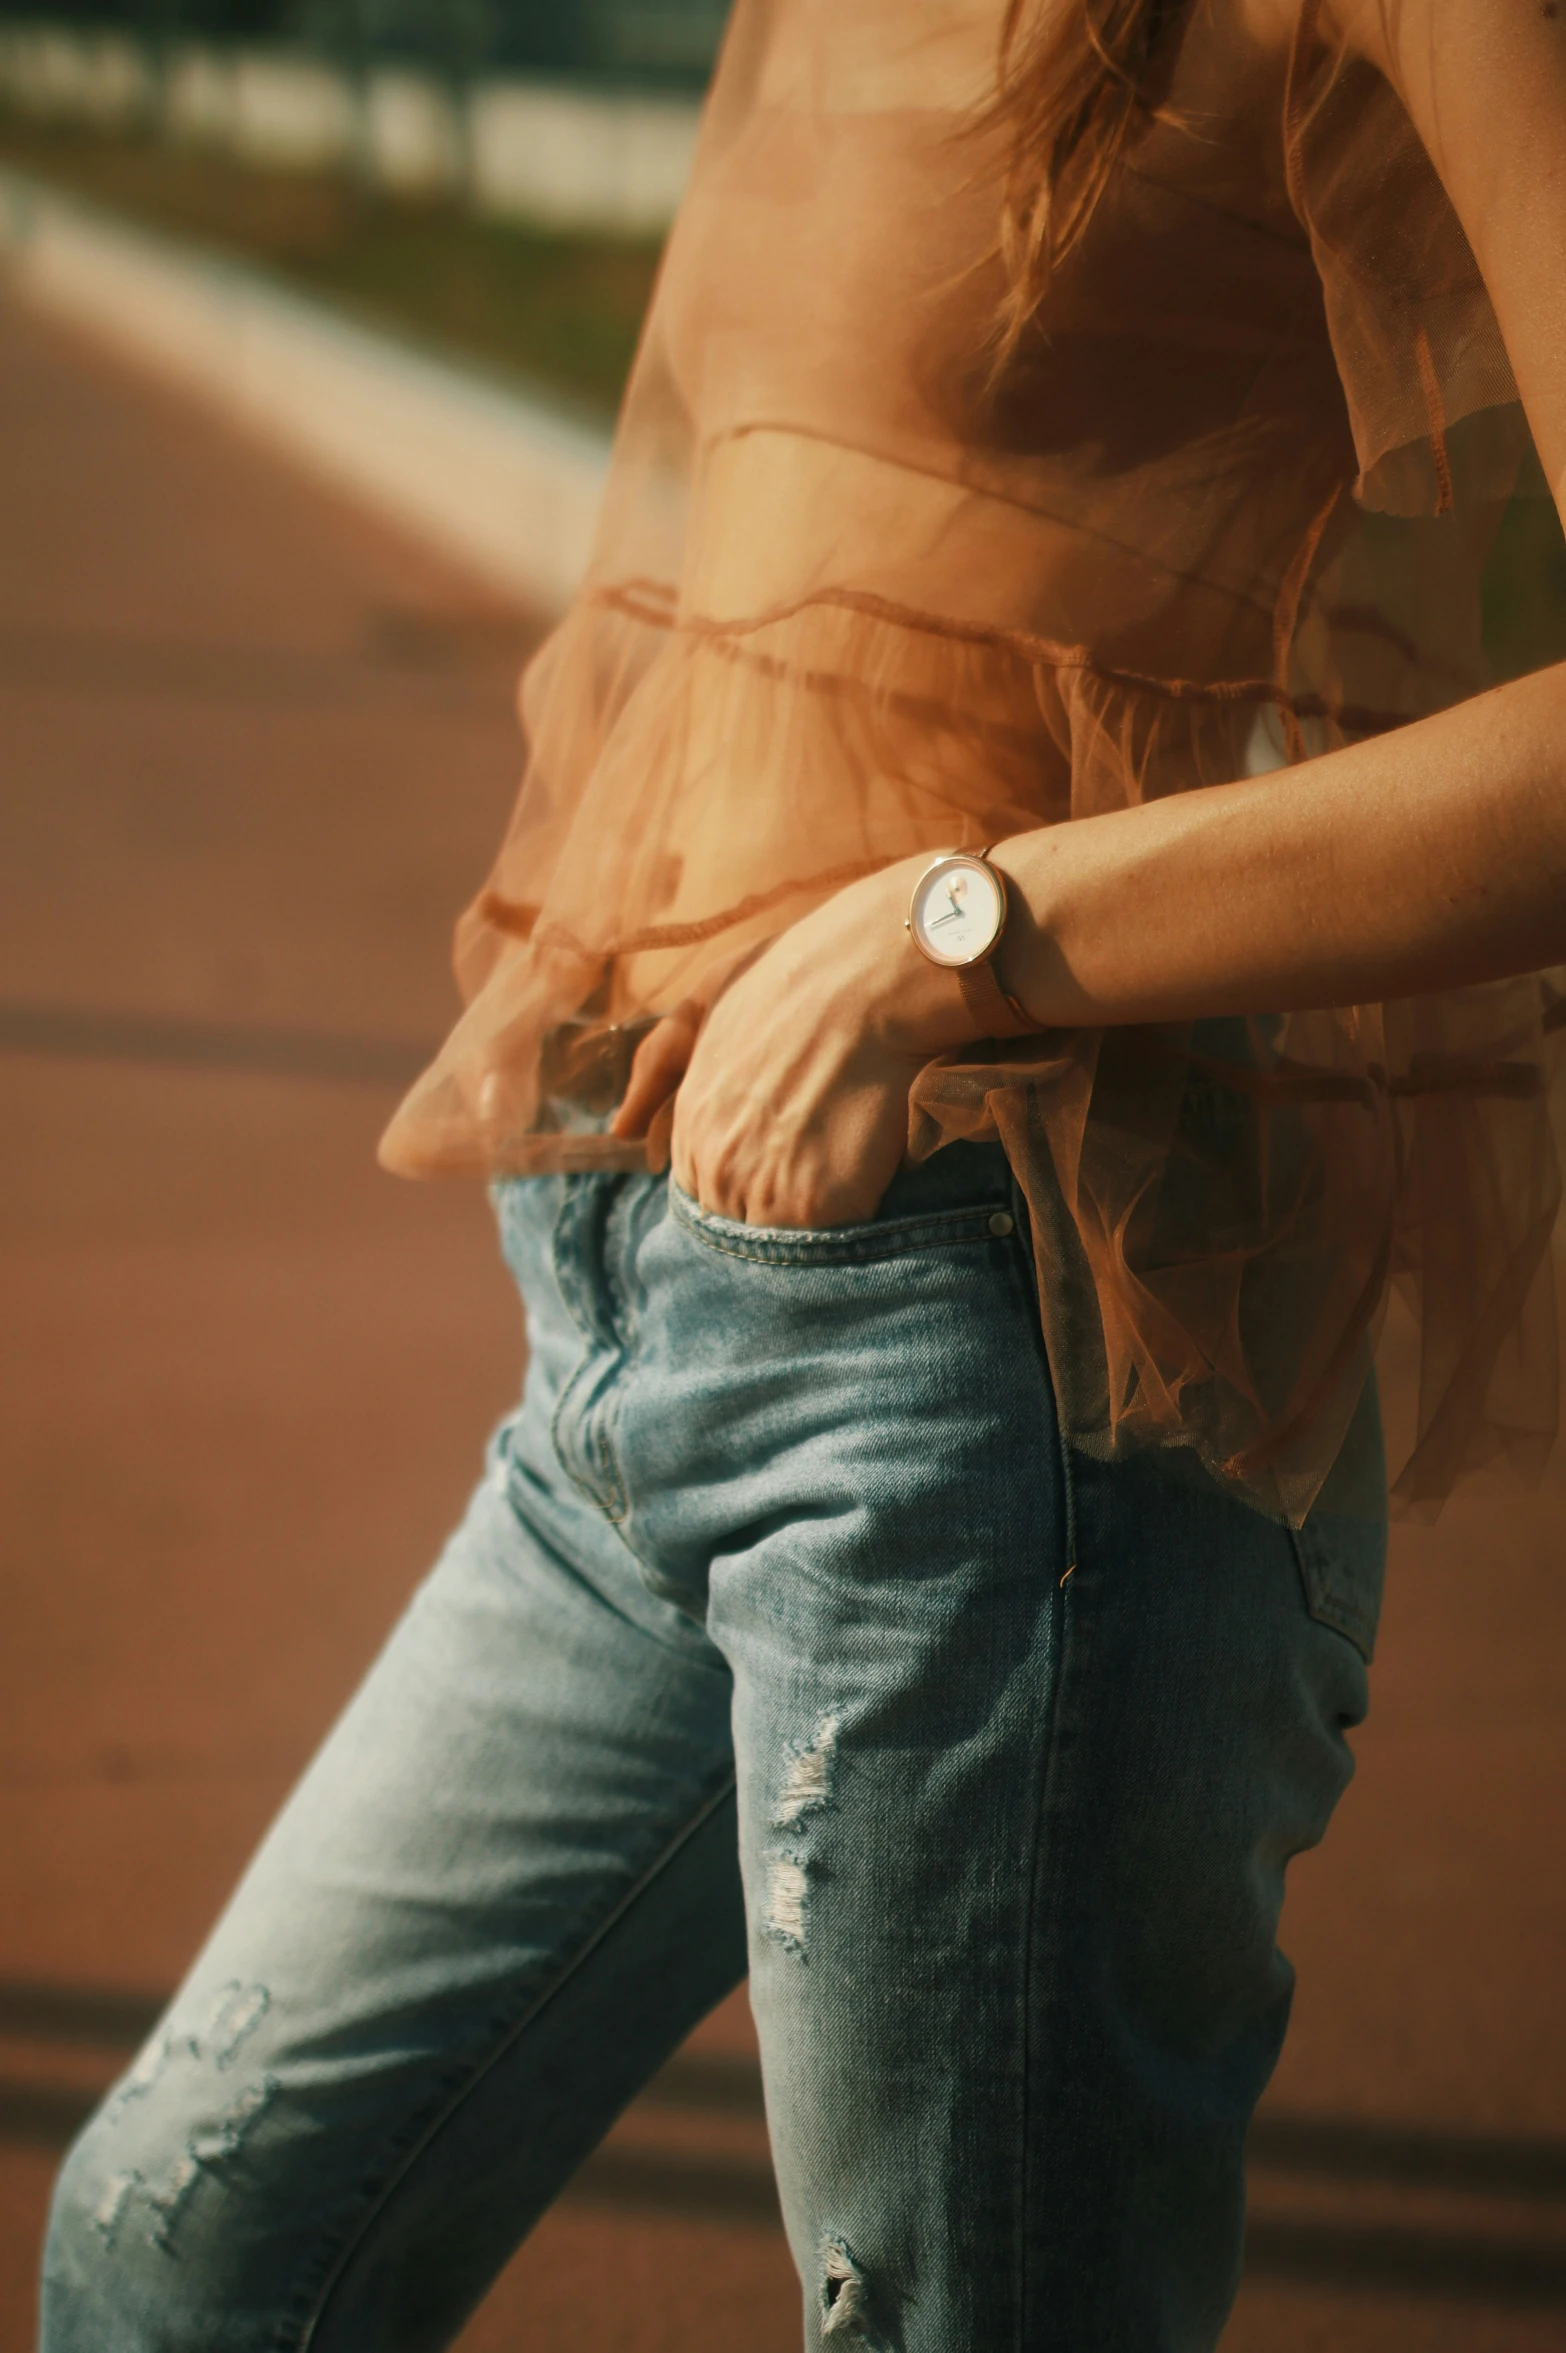 woman wearing a watch and jeans standing on street